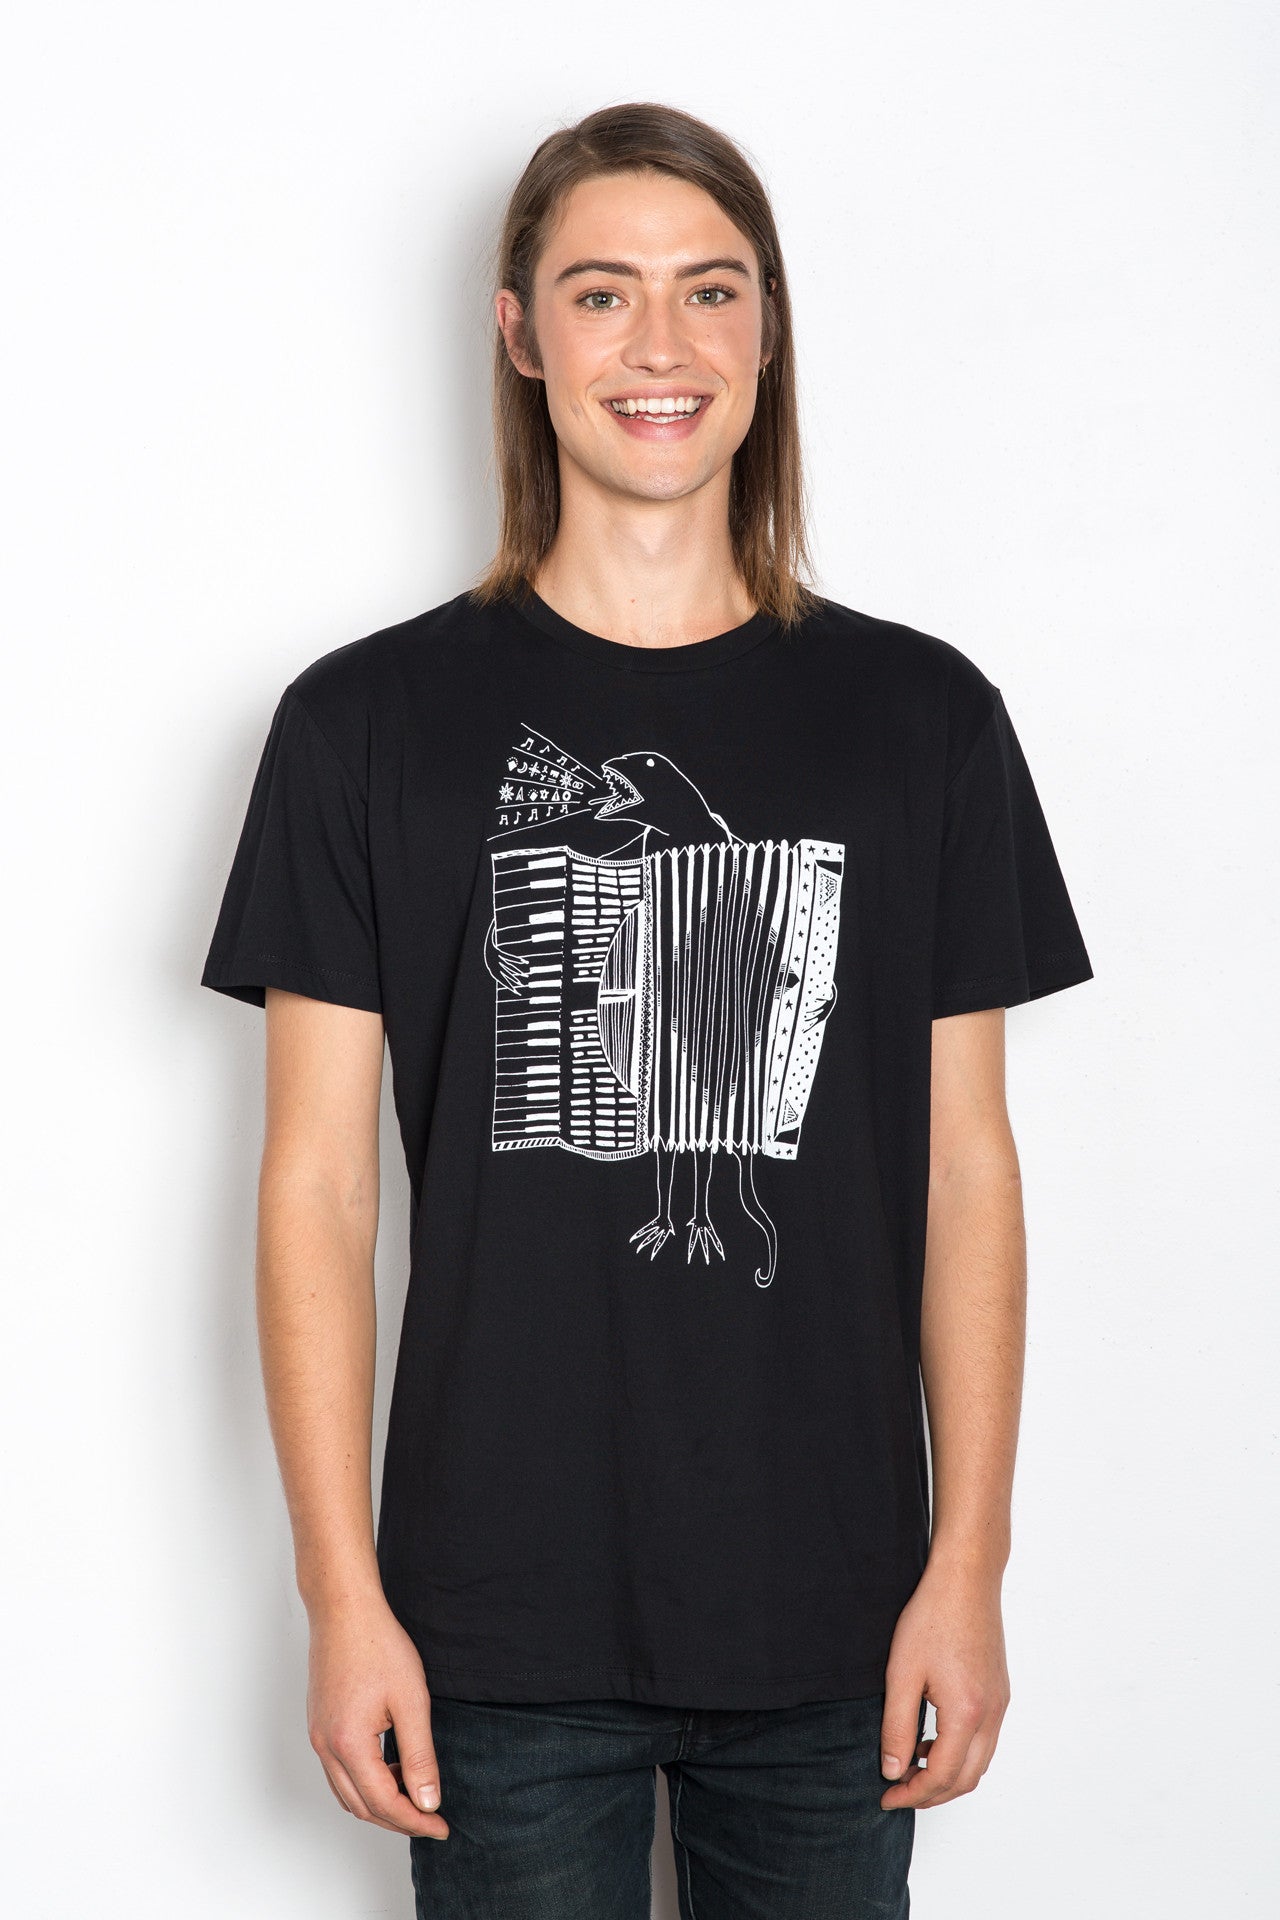 The Accordion of Unexpected Fortunes Men's Sovereign Tee